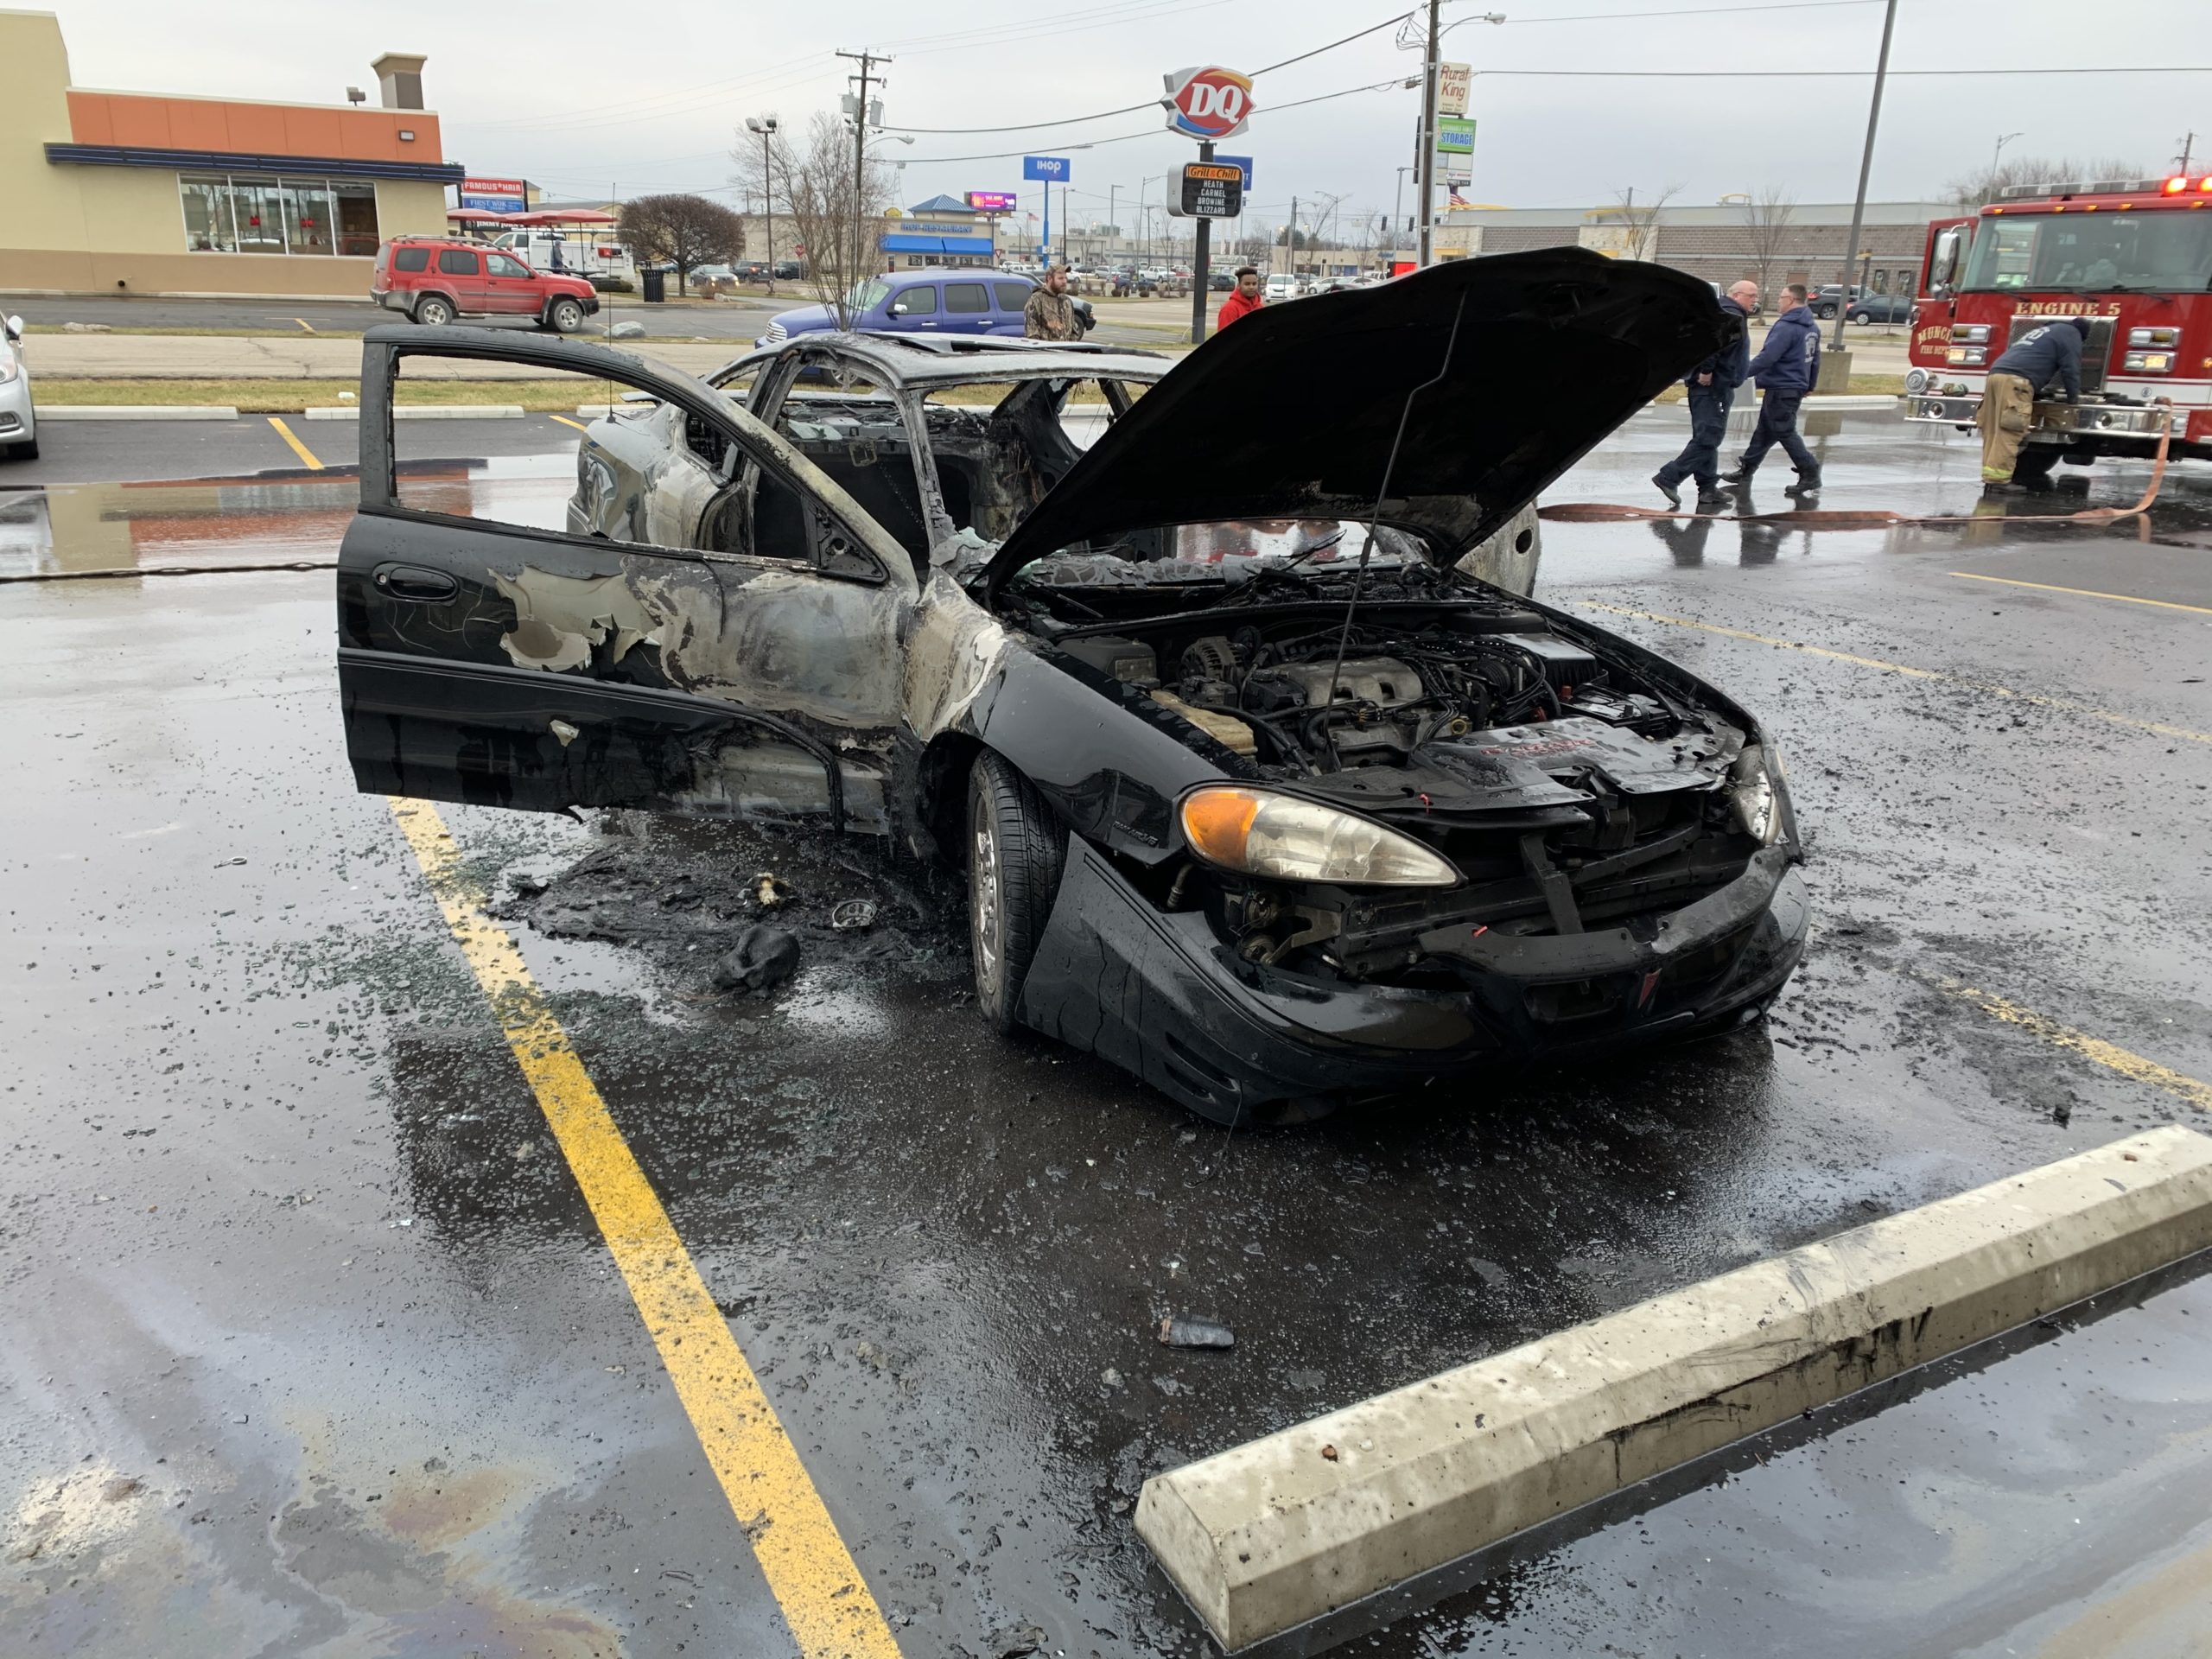 Flames, but not from the grill. Car Catches fire outside of local Burger King. post thumbnail image